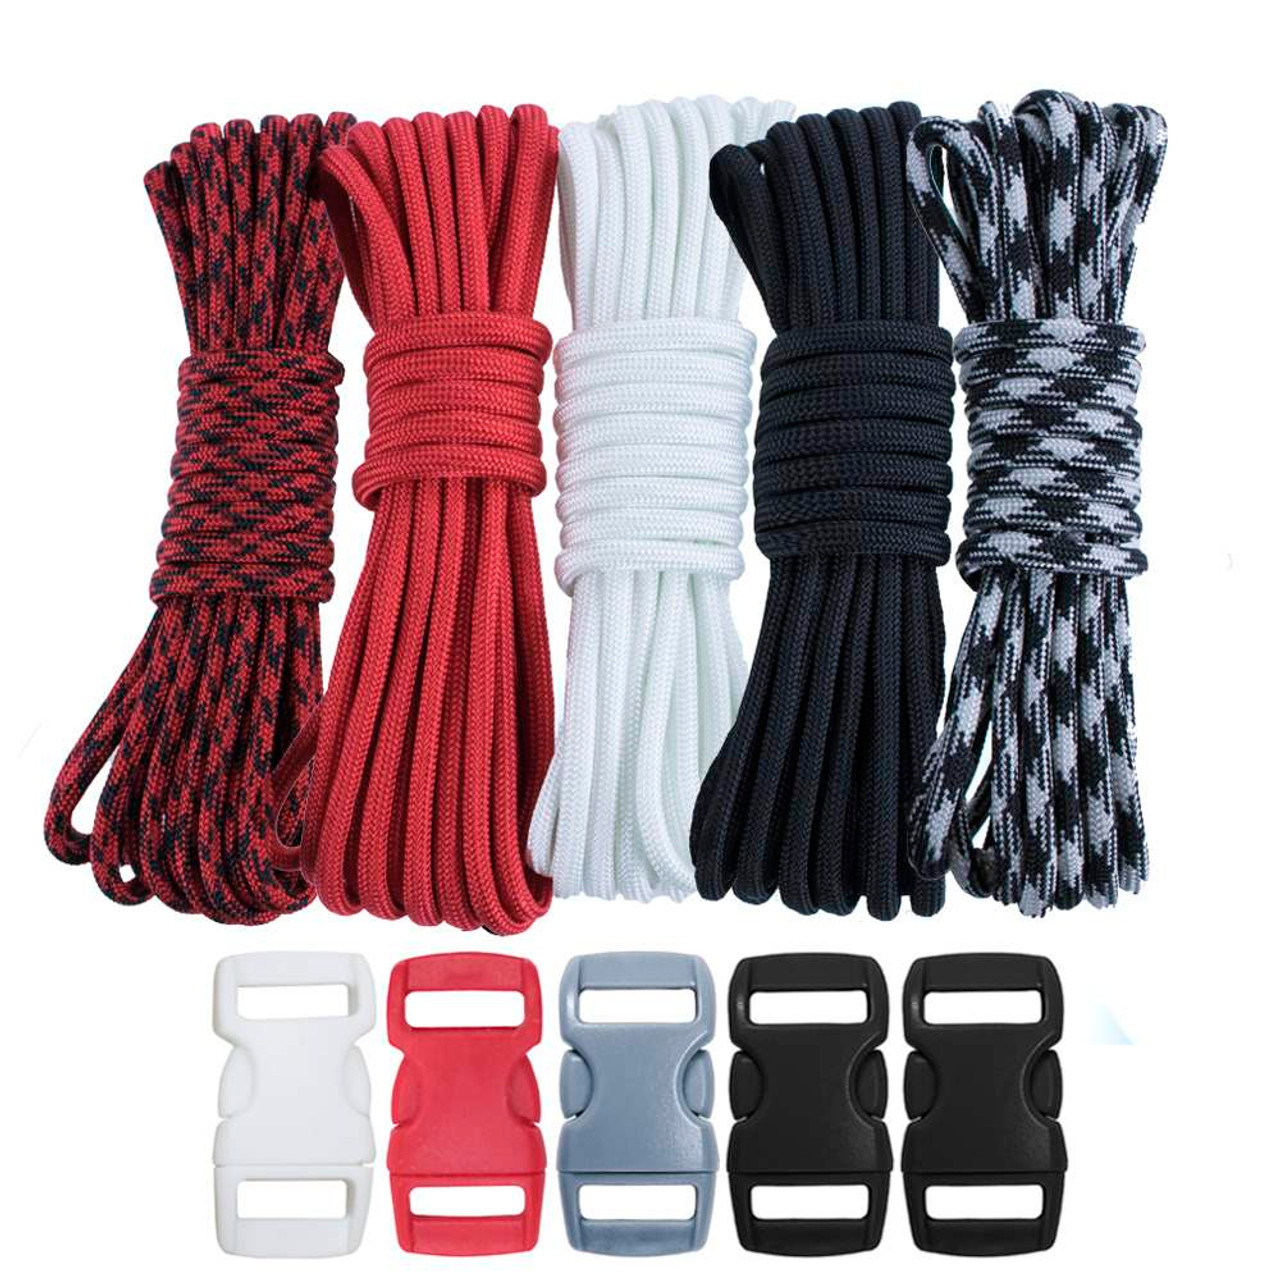 Paracord & Buckles Combo Kit - Boy Scouts